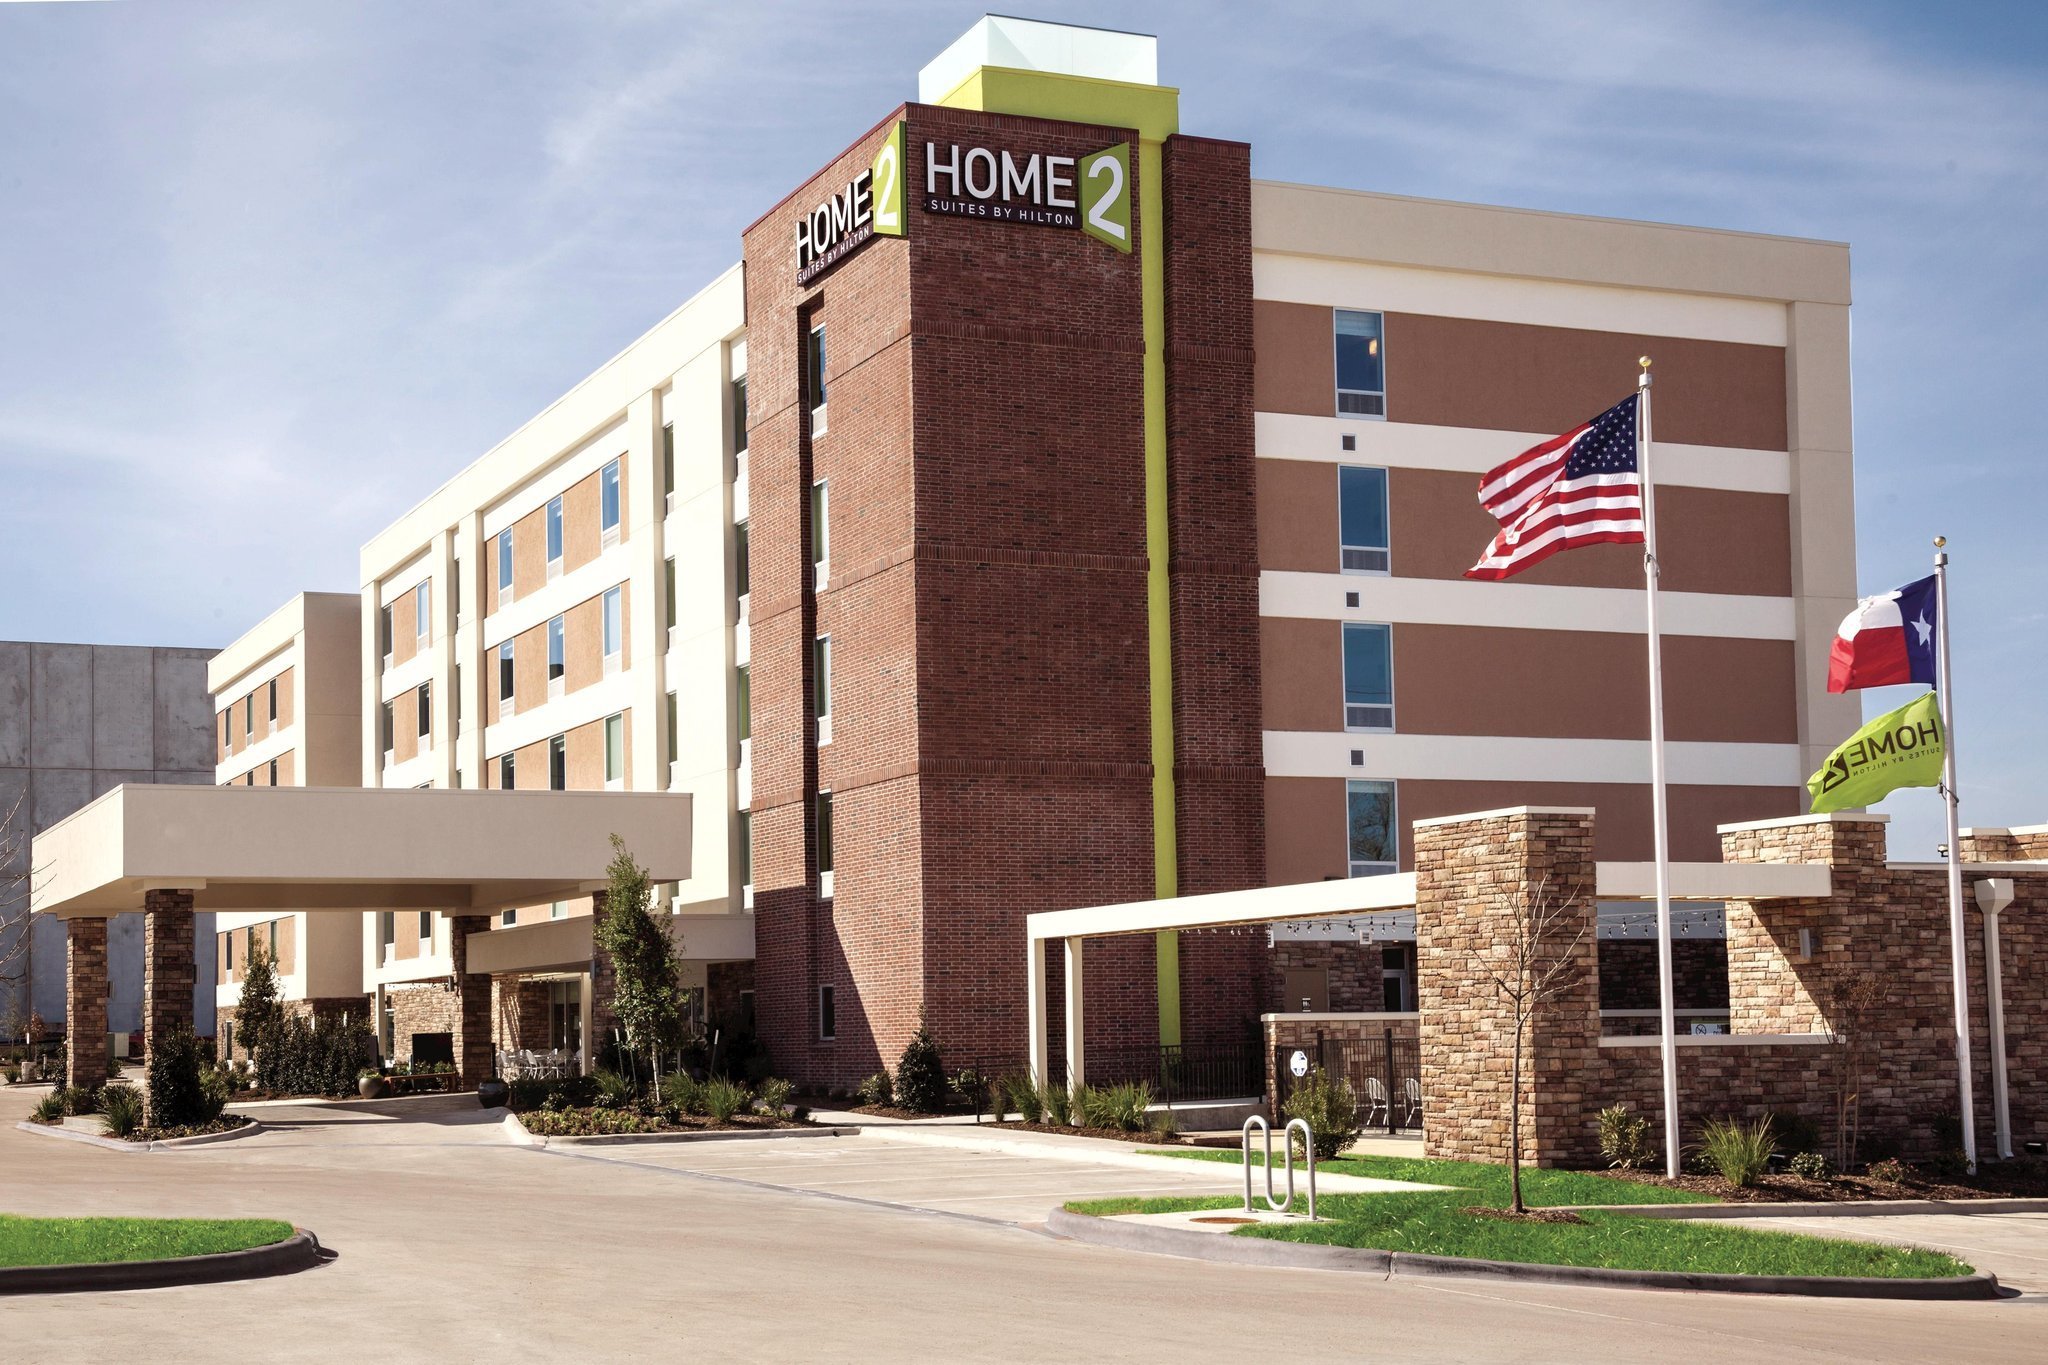 Photo of Home2 Suites by Hilton College Station, College Station, TX